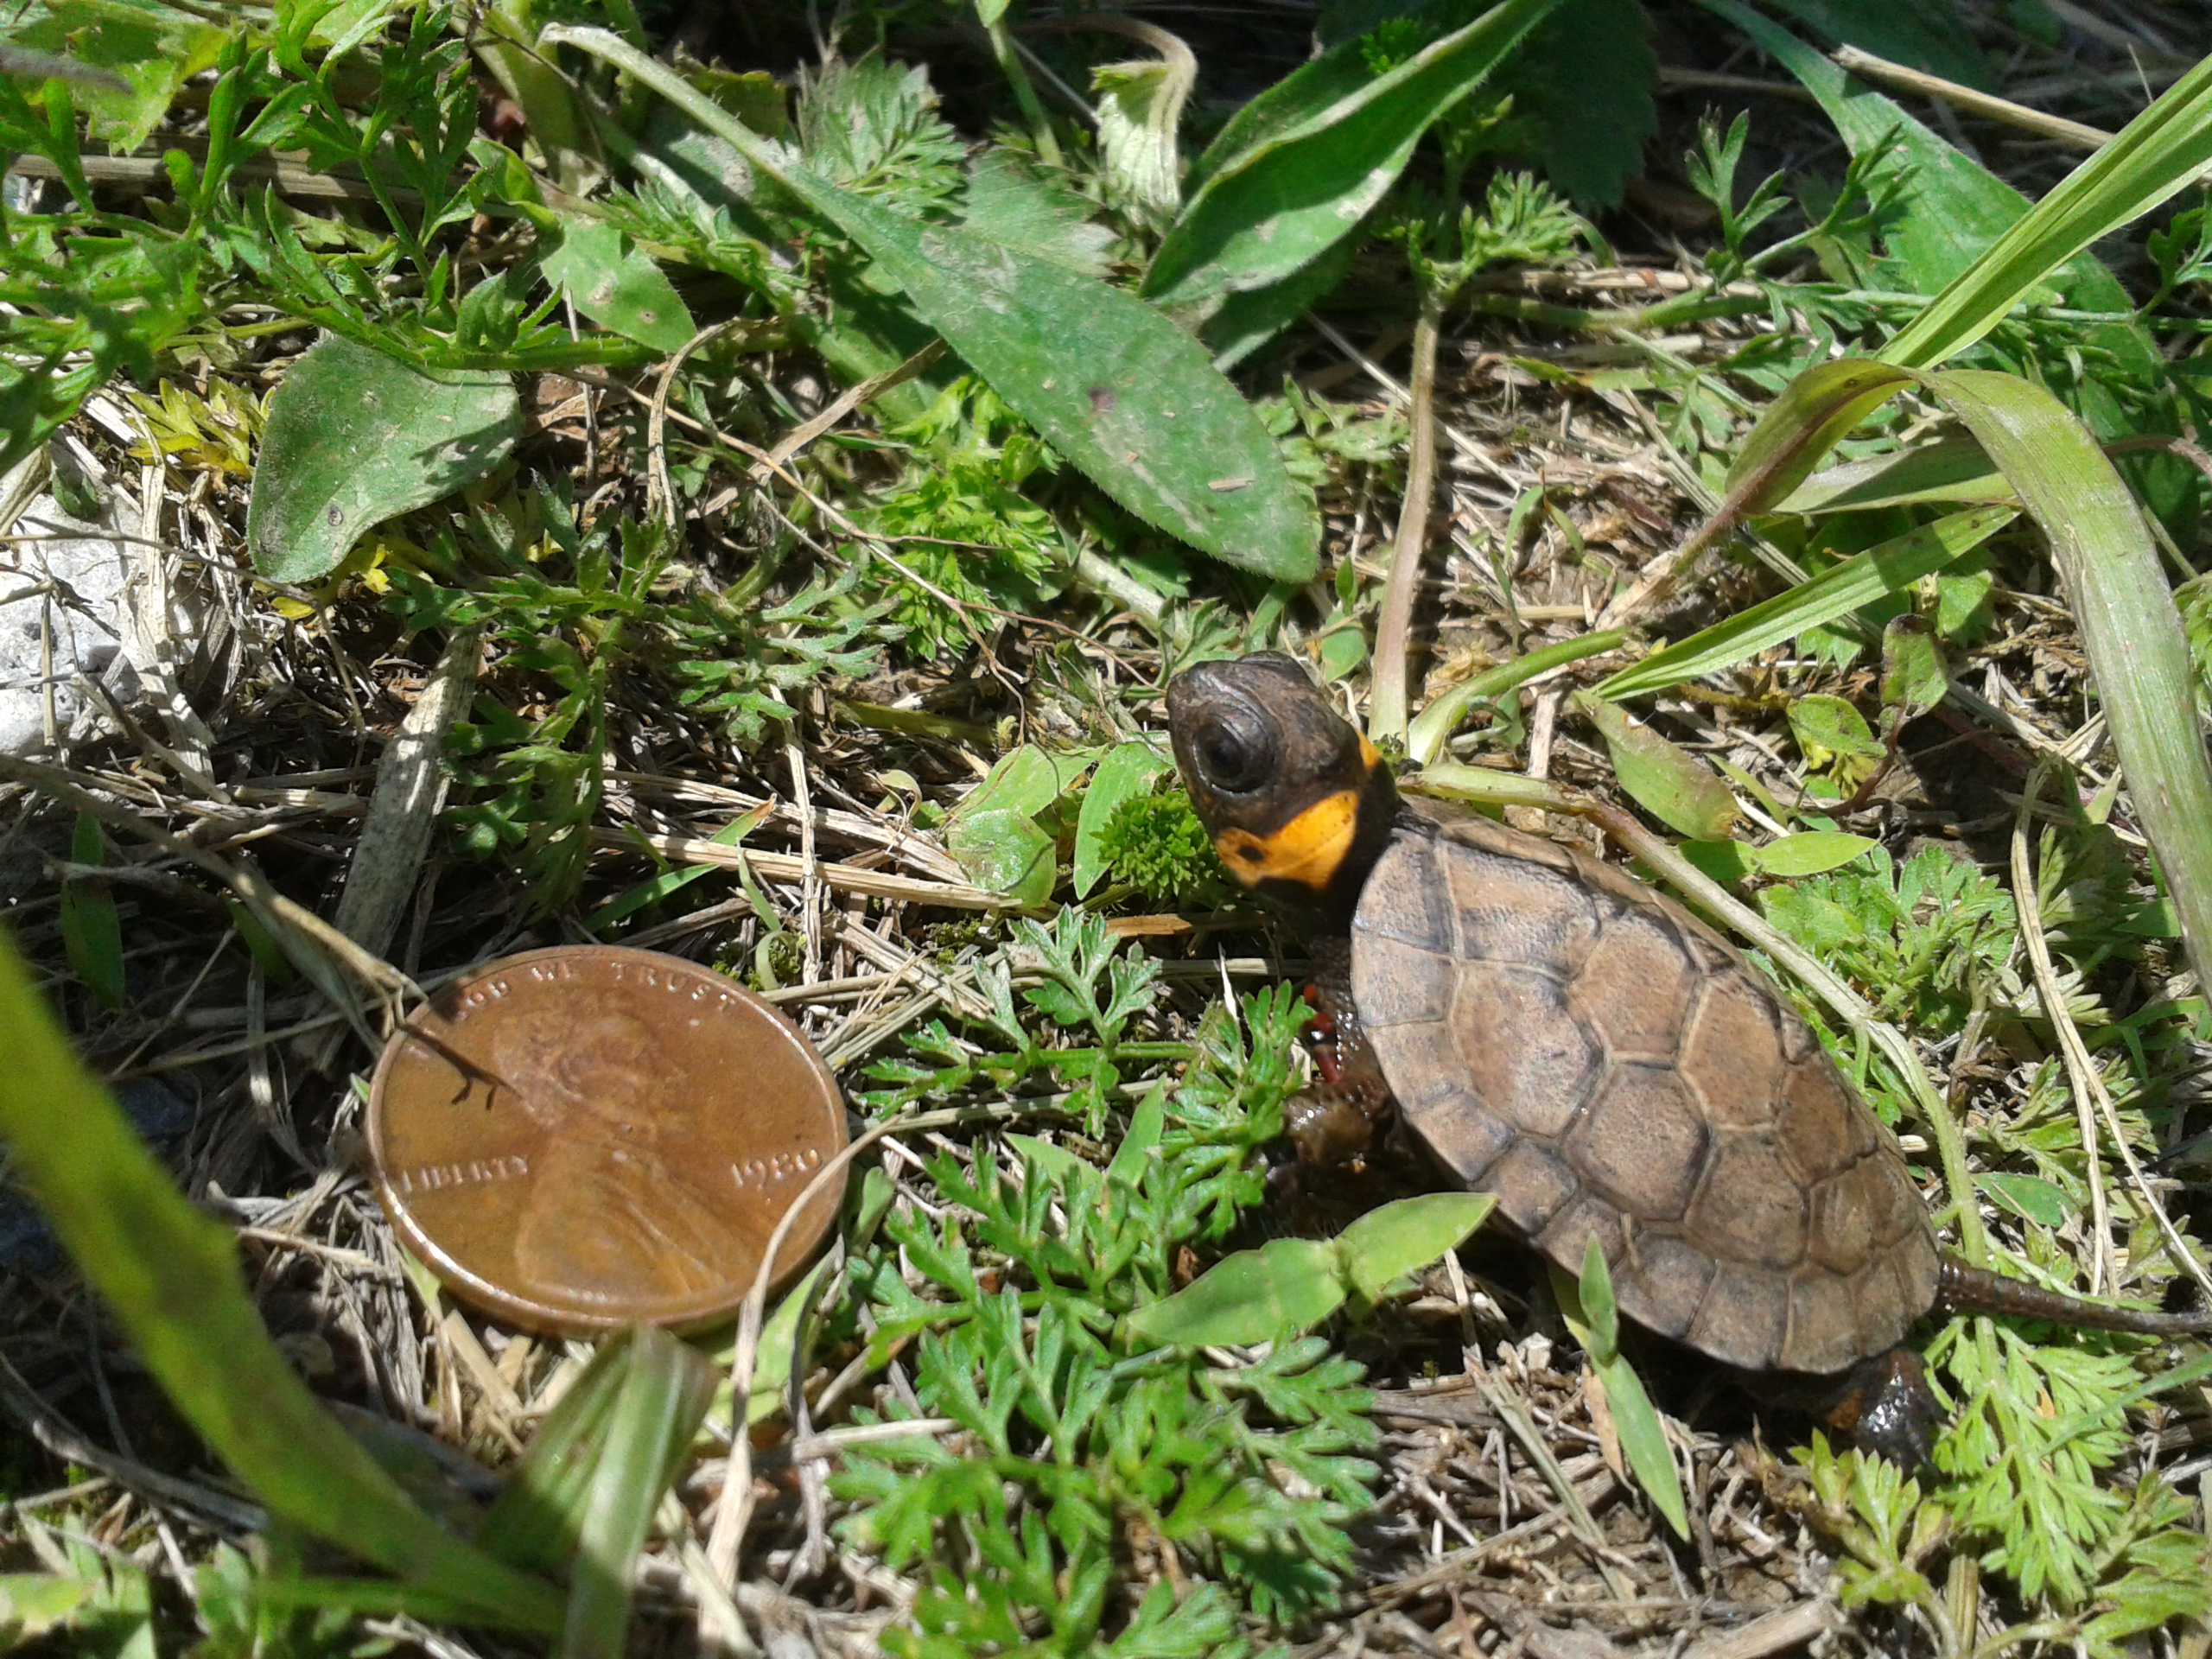 a small brown turtle with yellow markings on its next on the ground next to a penny